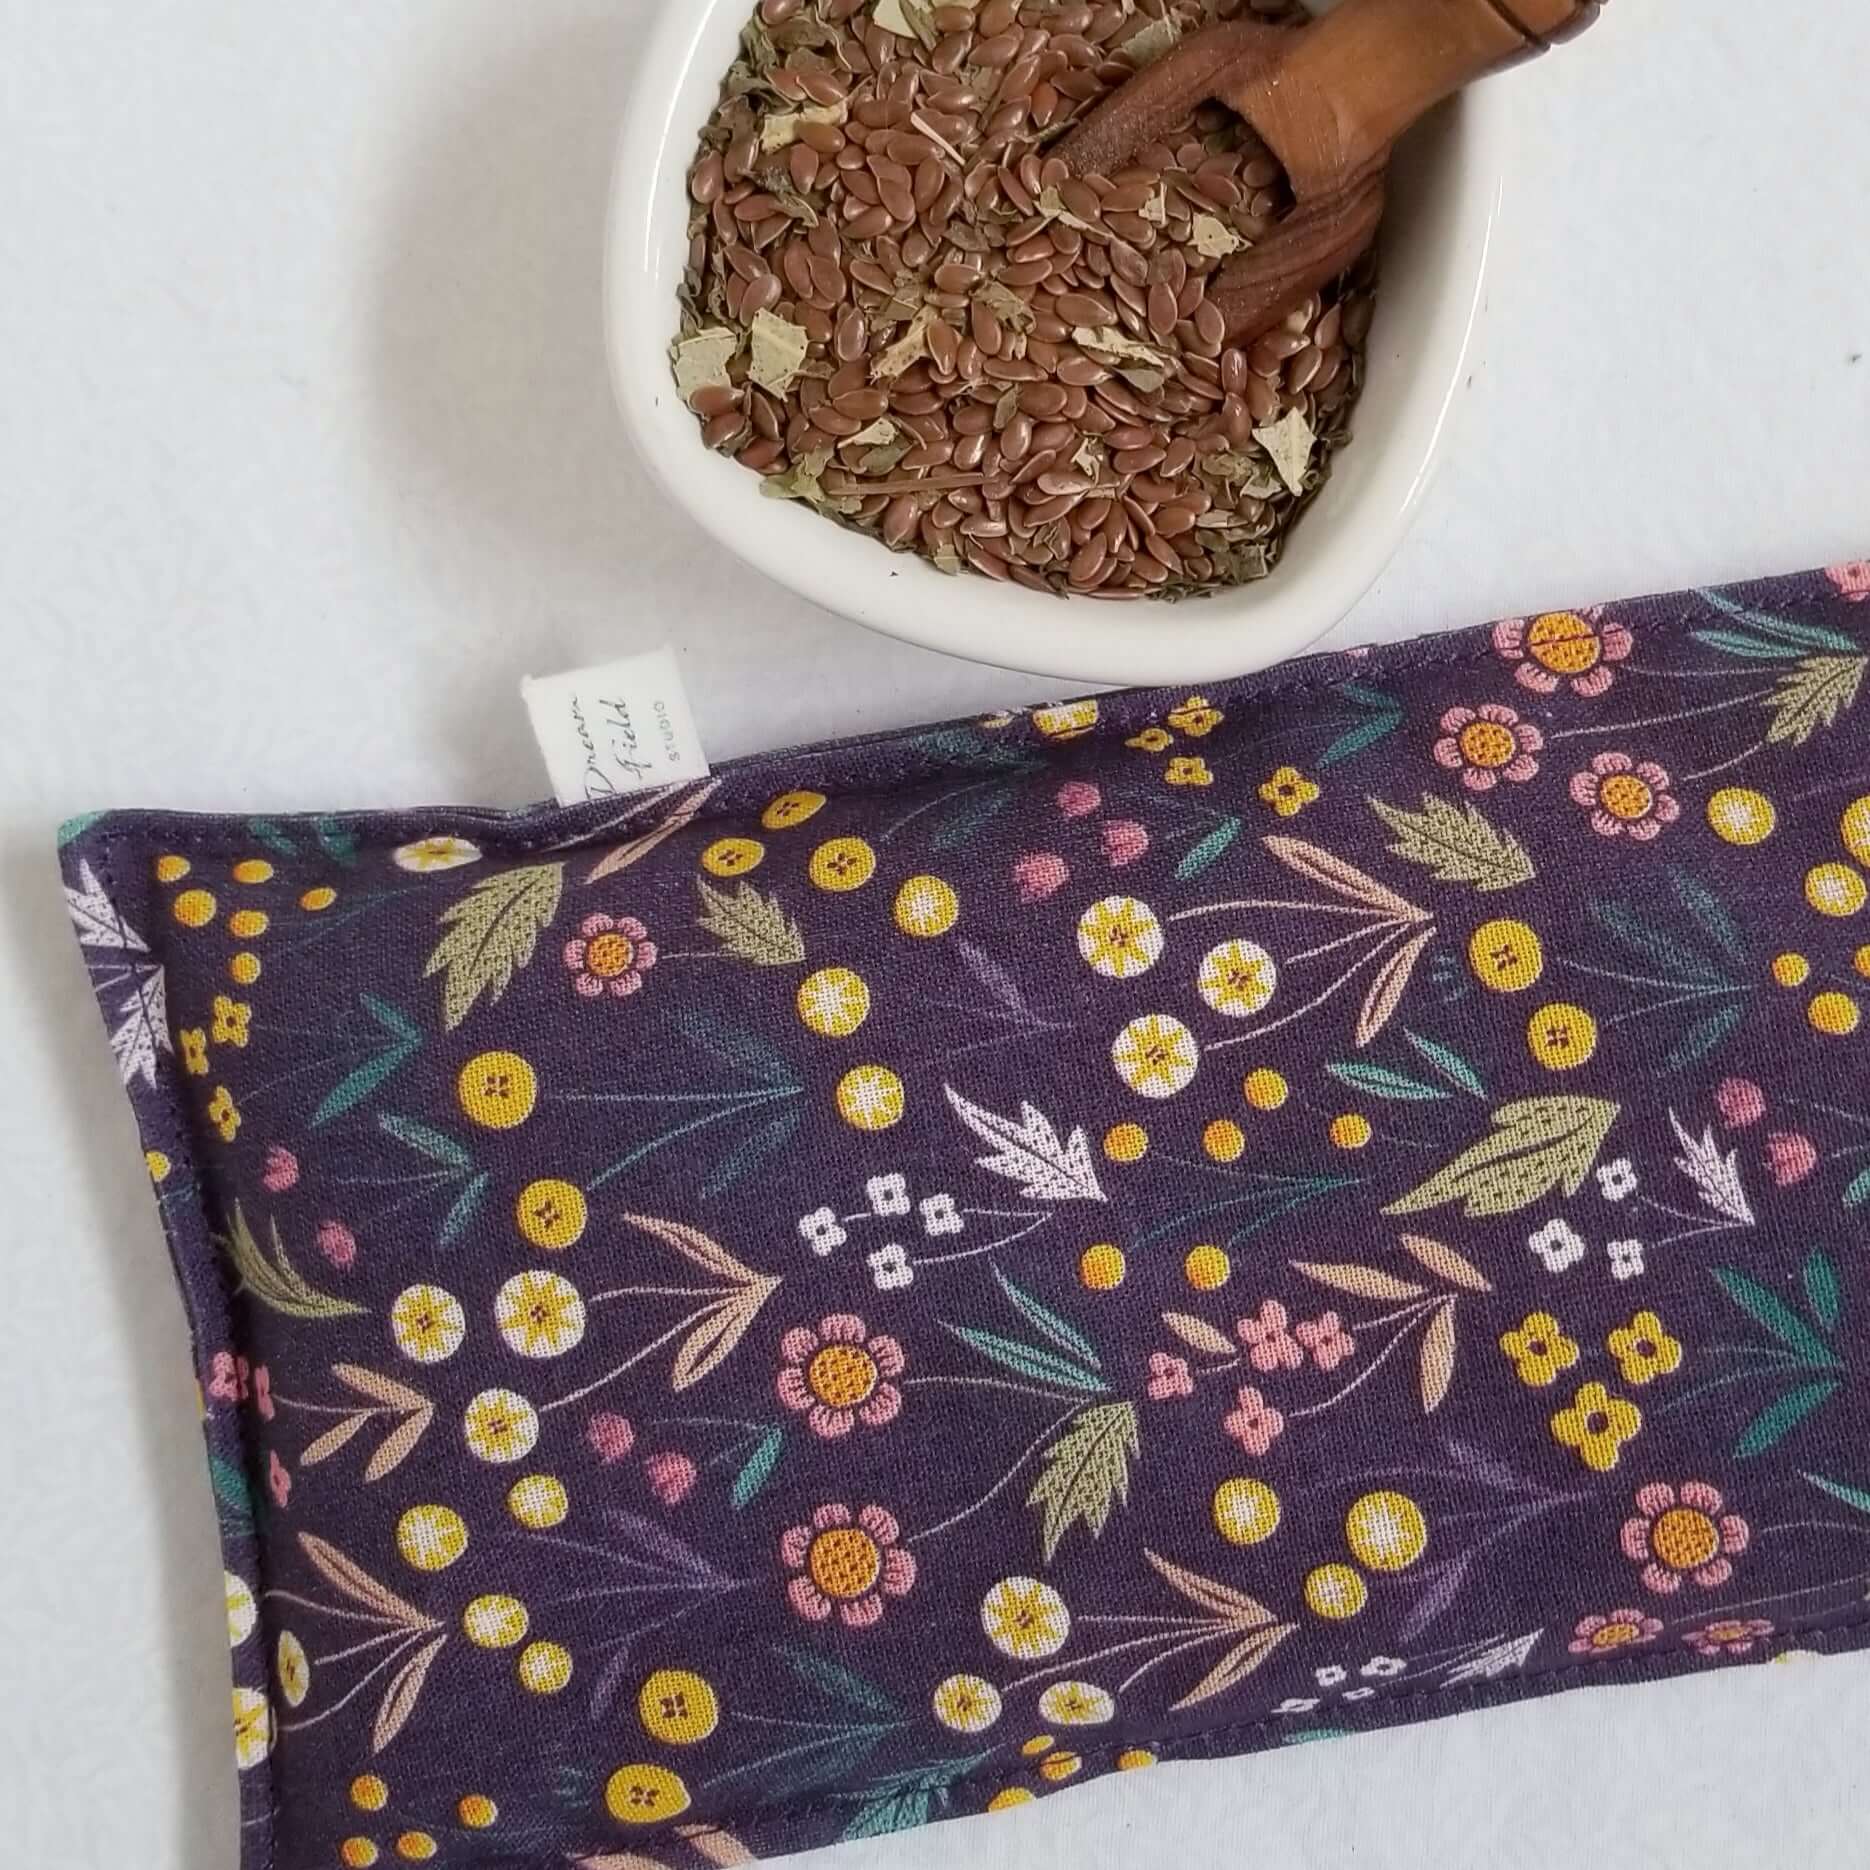 Eucalyptus mint eye pillow forest floral print and bowl of flax seeds and fresh dried herbs